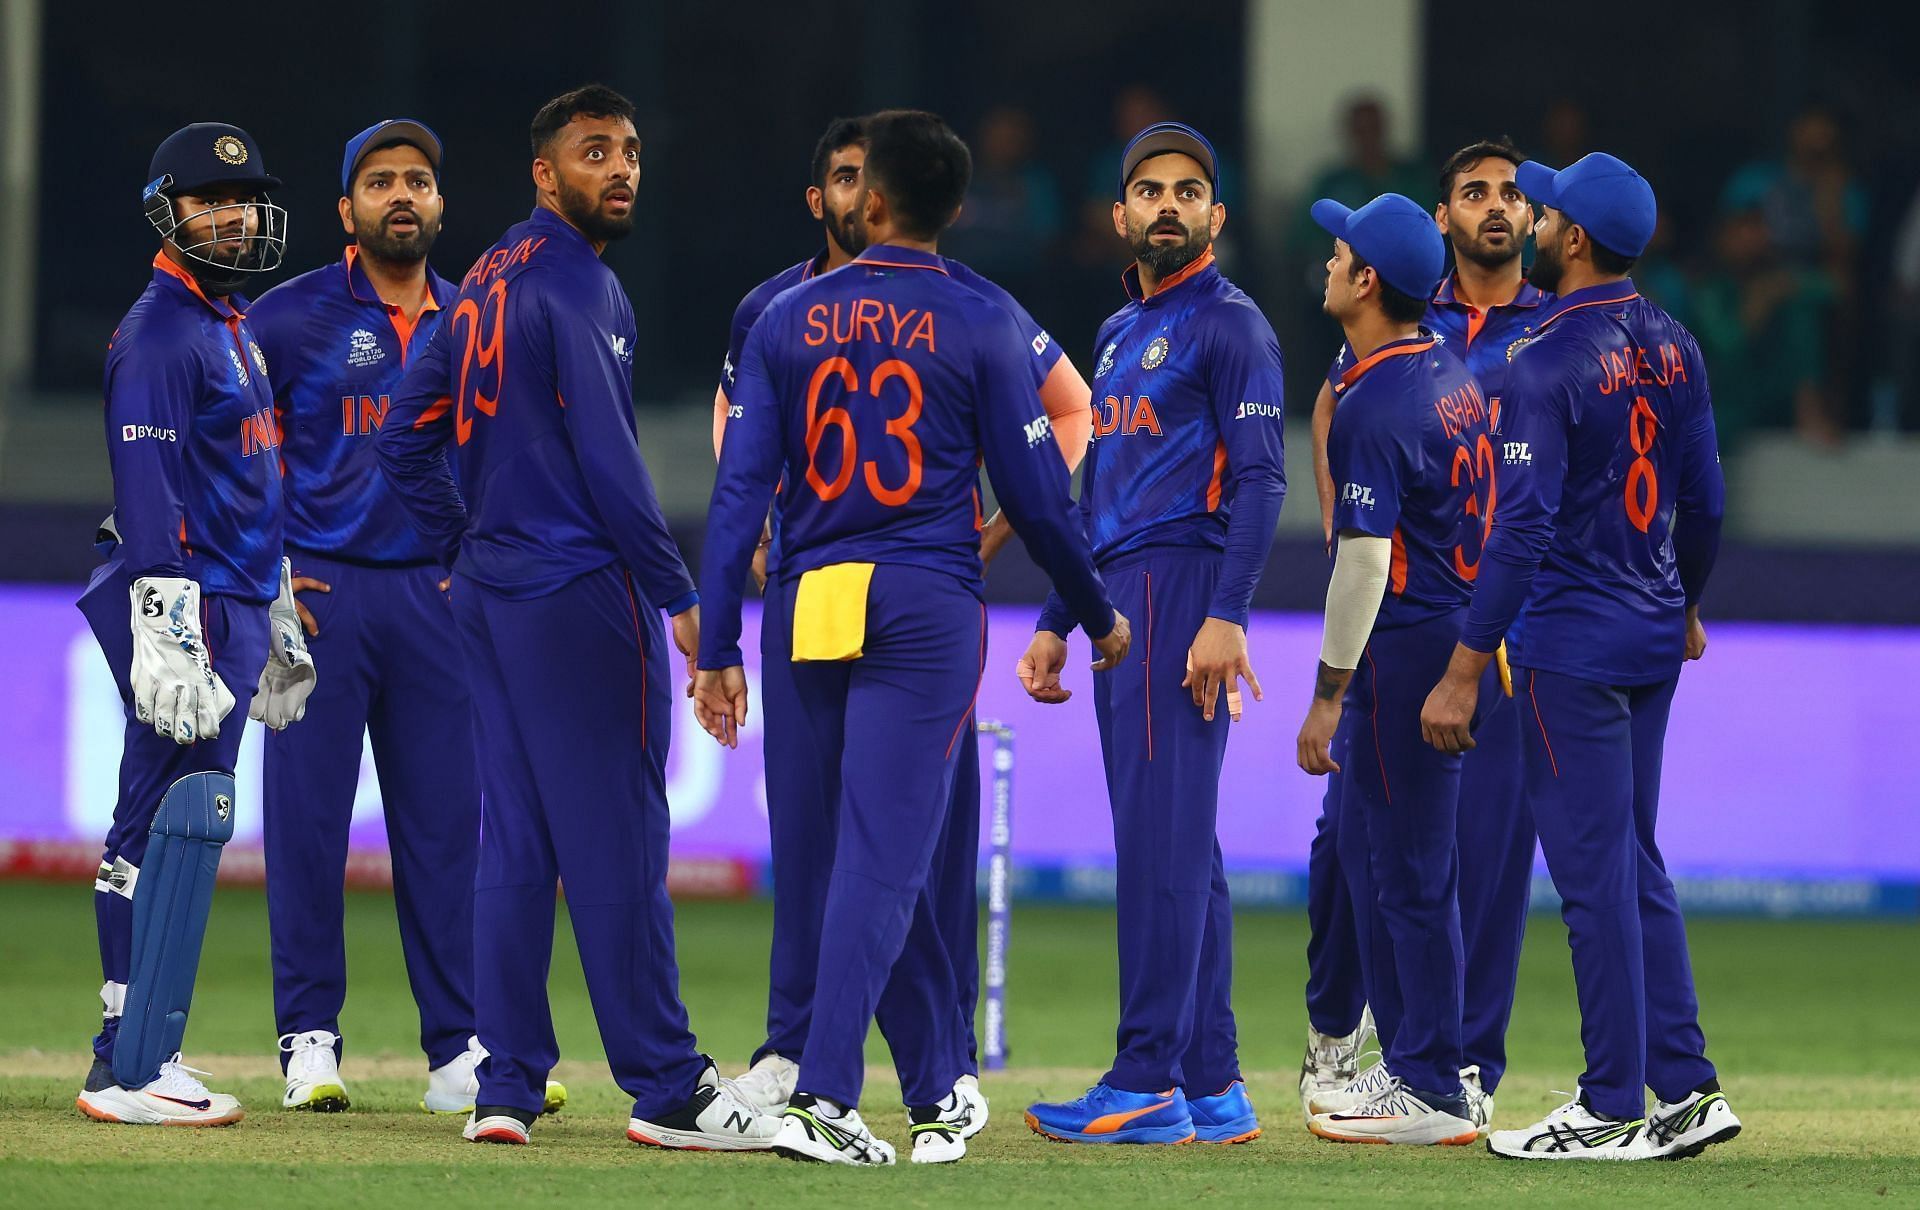 Team India during the T20 World Cup 2021 match against Pakistan. Pic: Getty Images